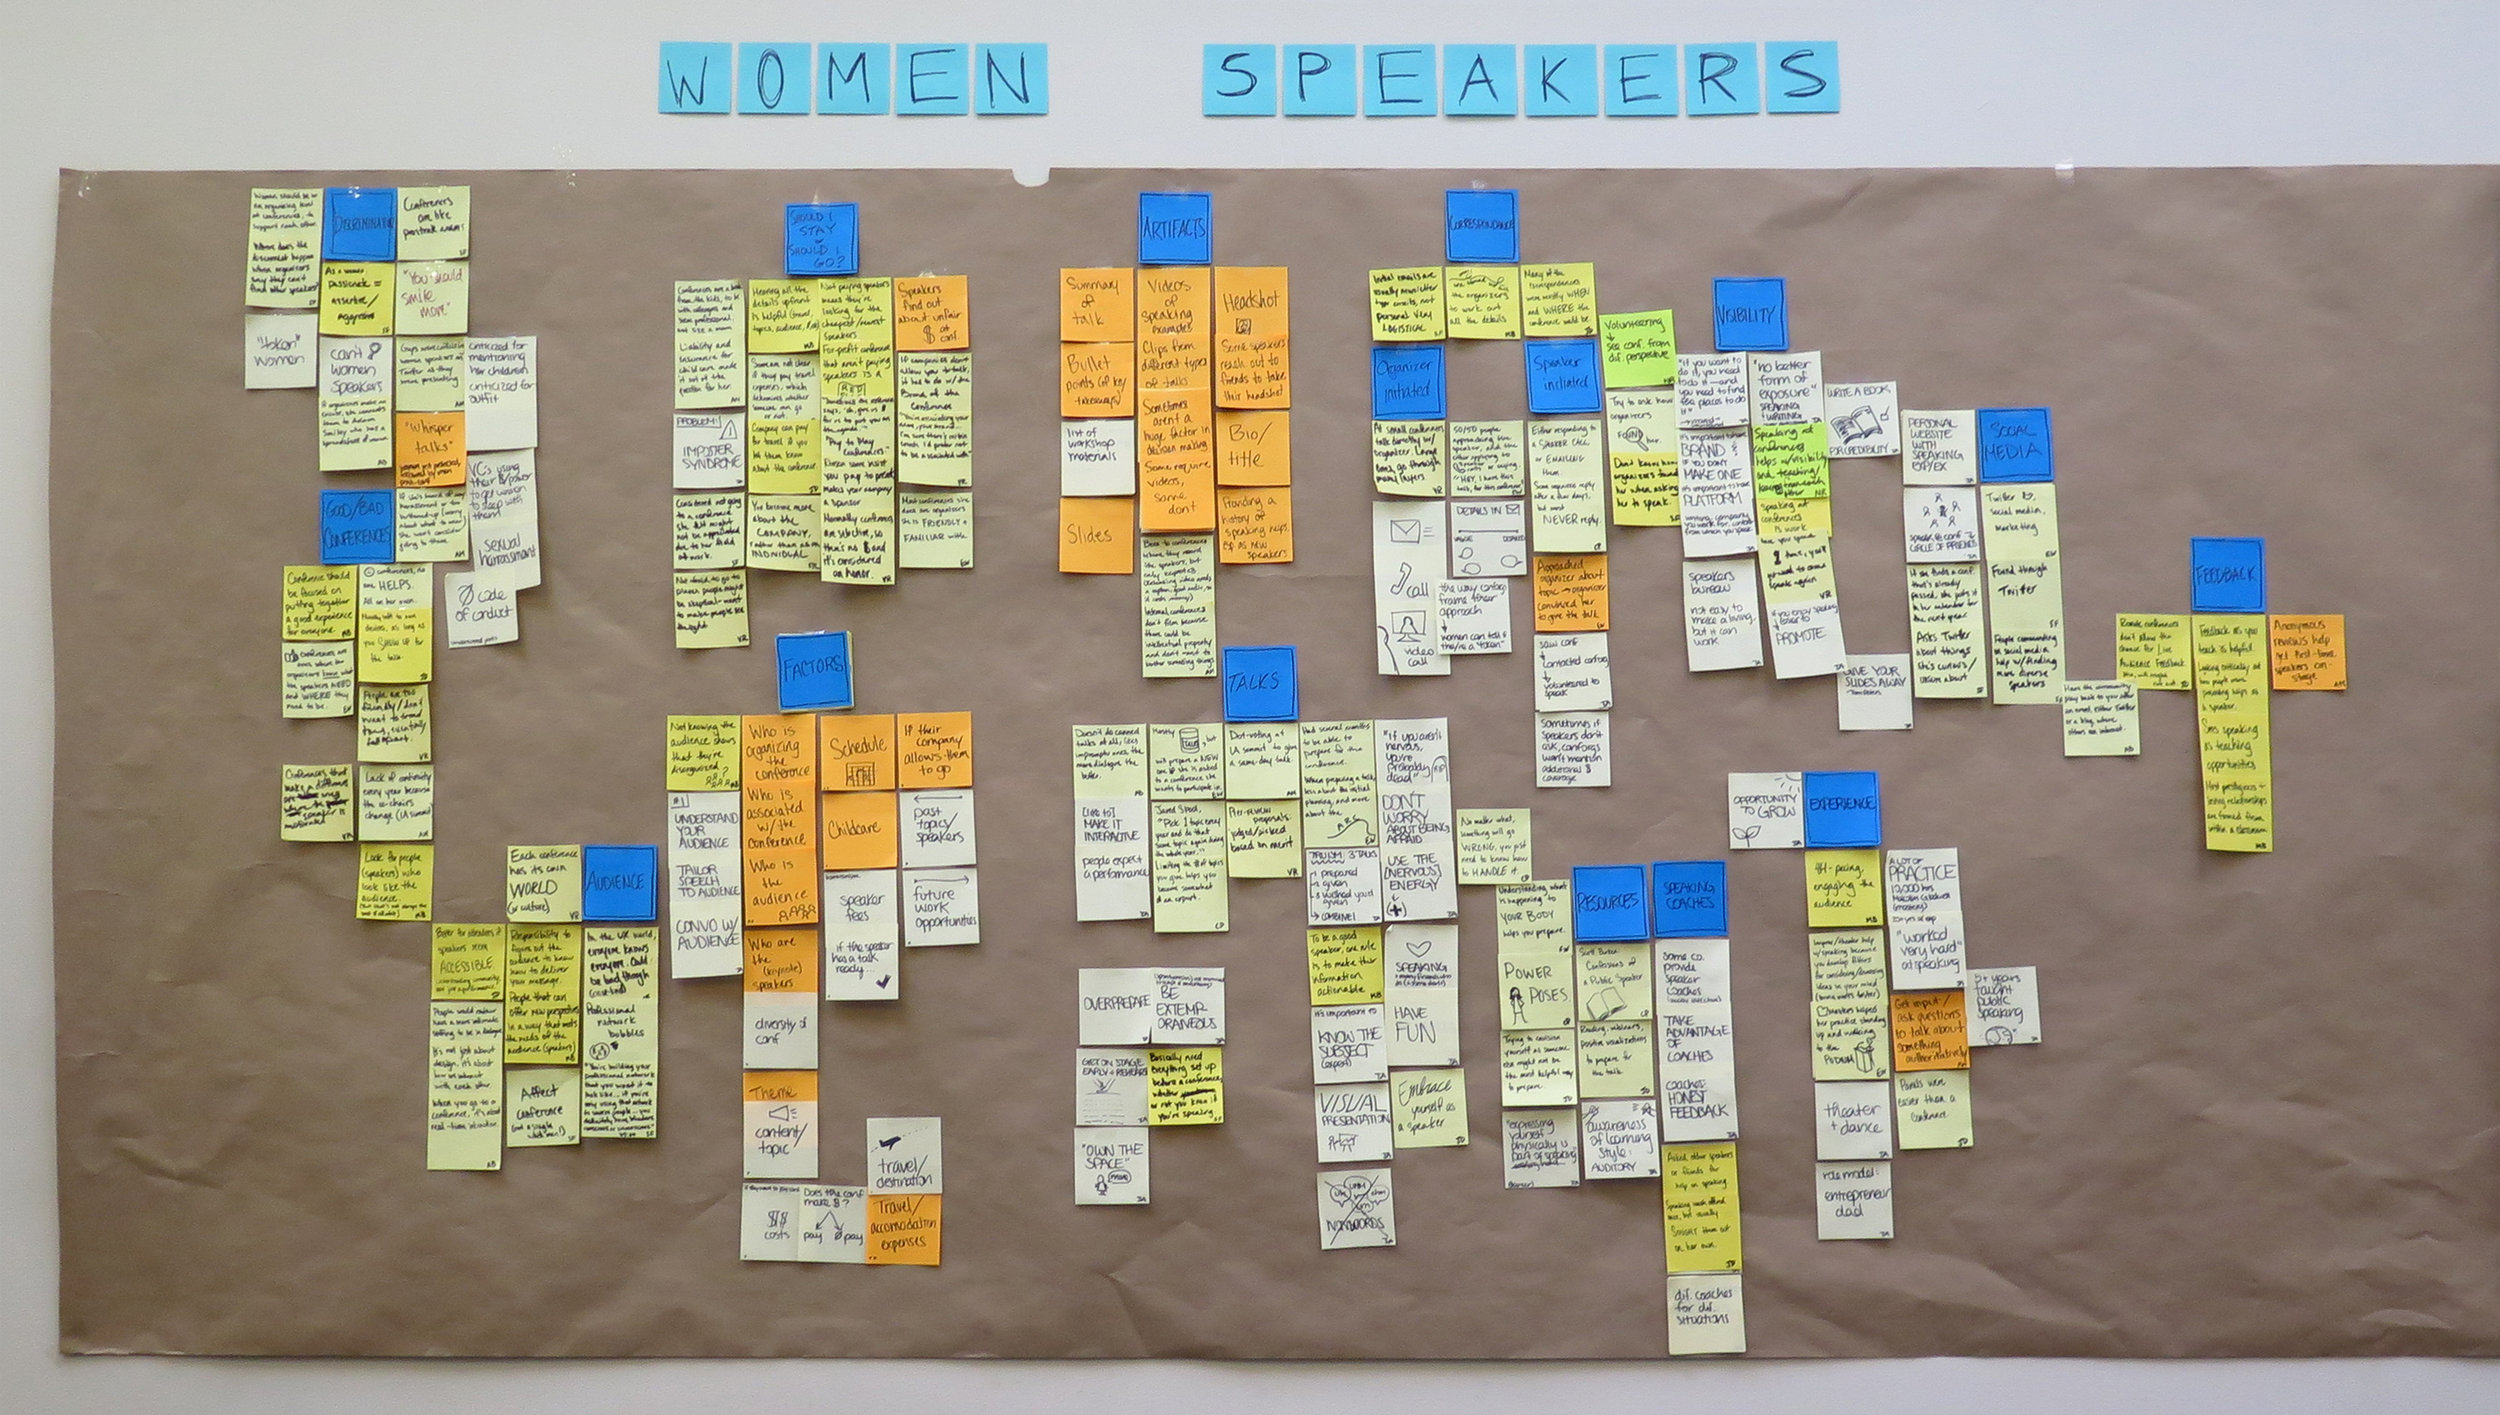  Synthesis from the women speaker interviews we did 